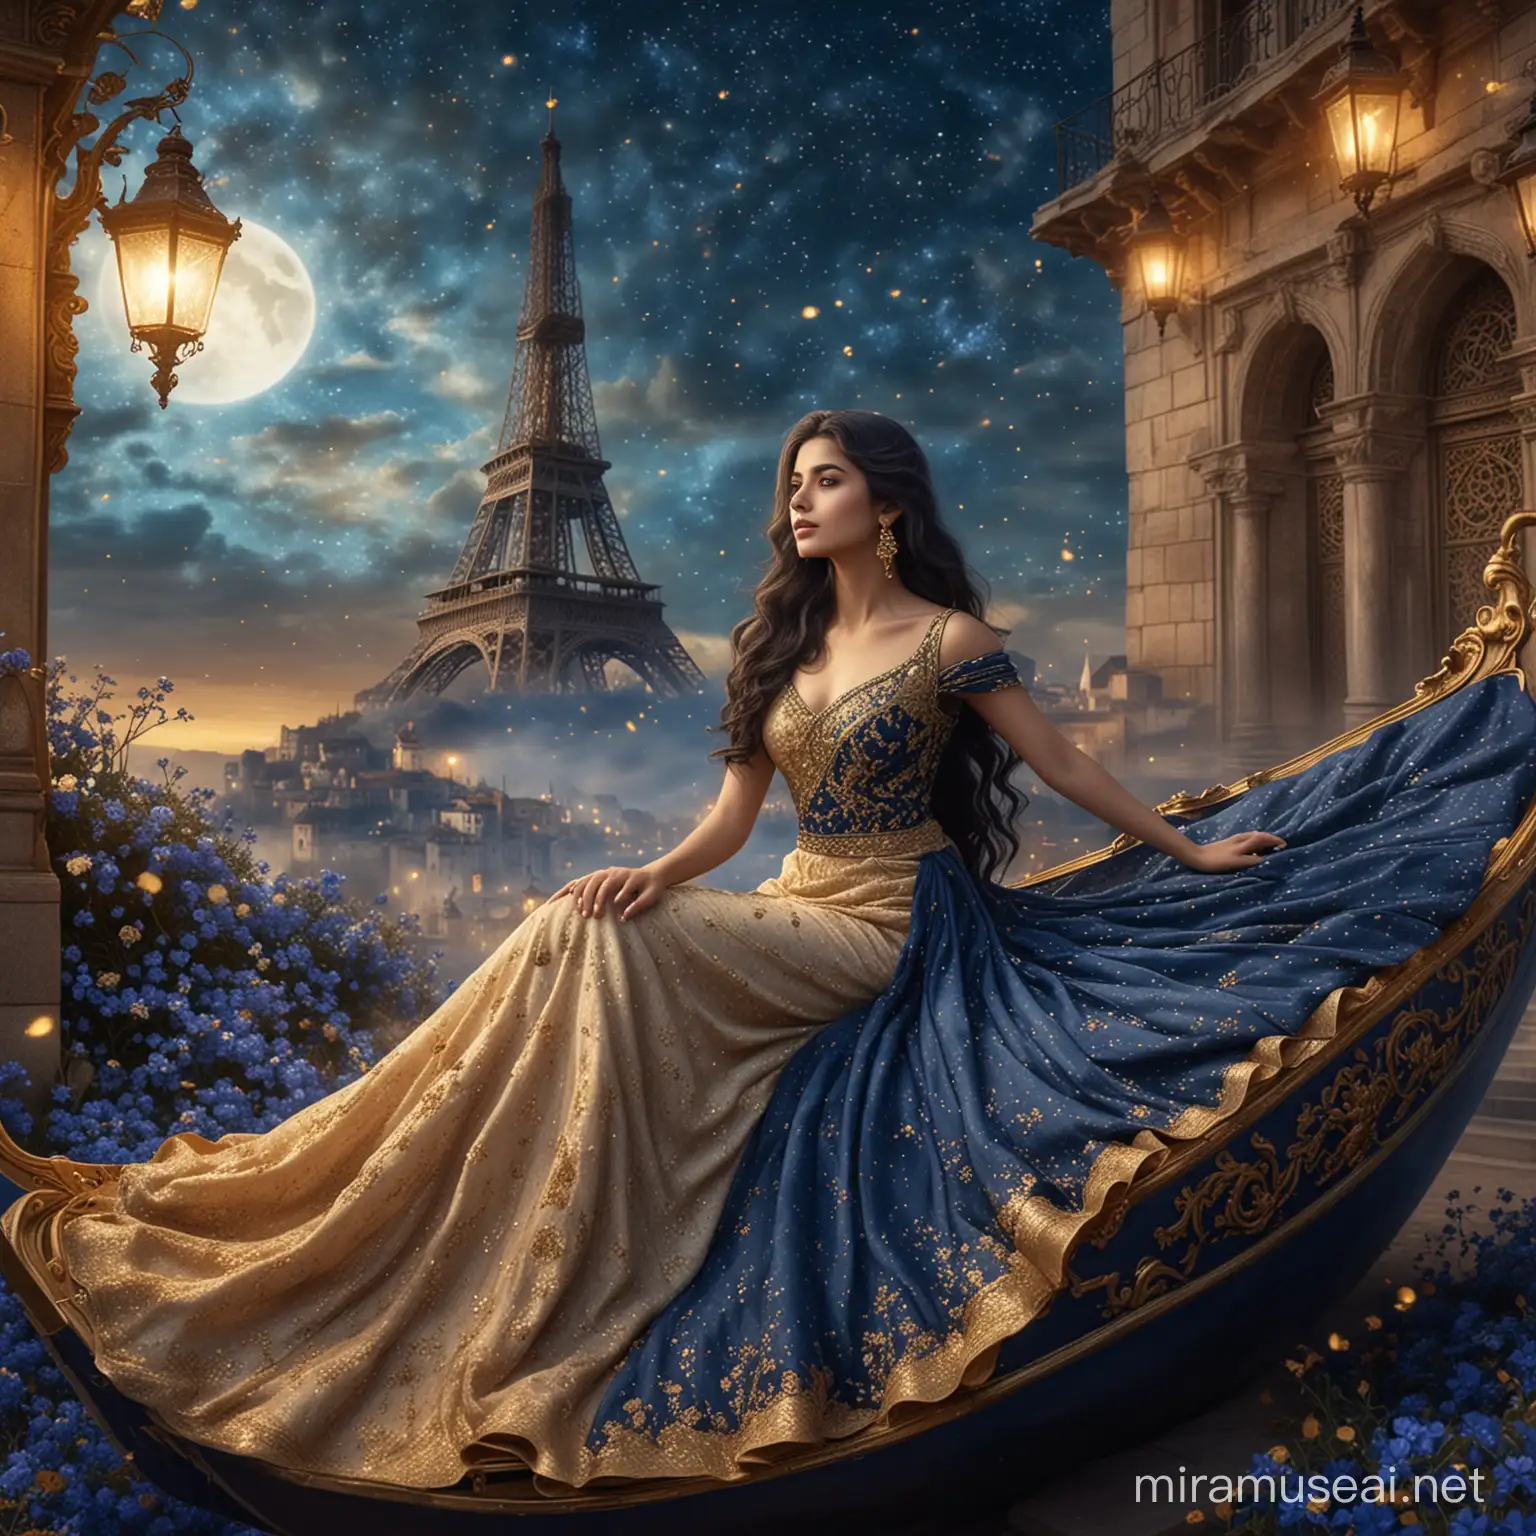 Elegant Woman on Floral Boat Surrounded by Nebula Sky and Golden Dust